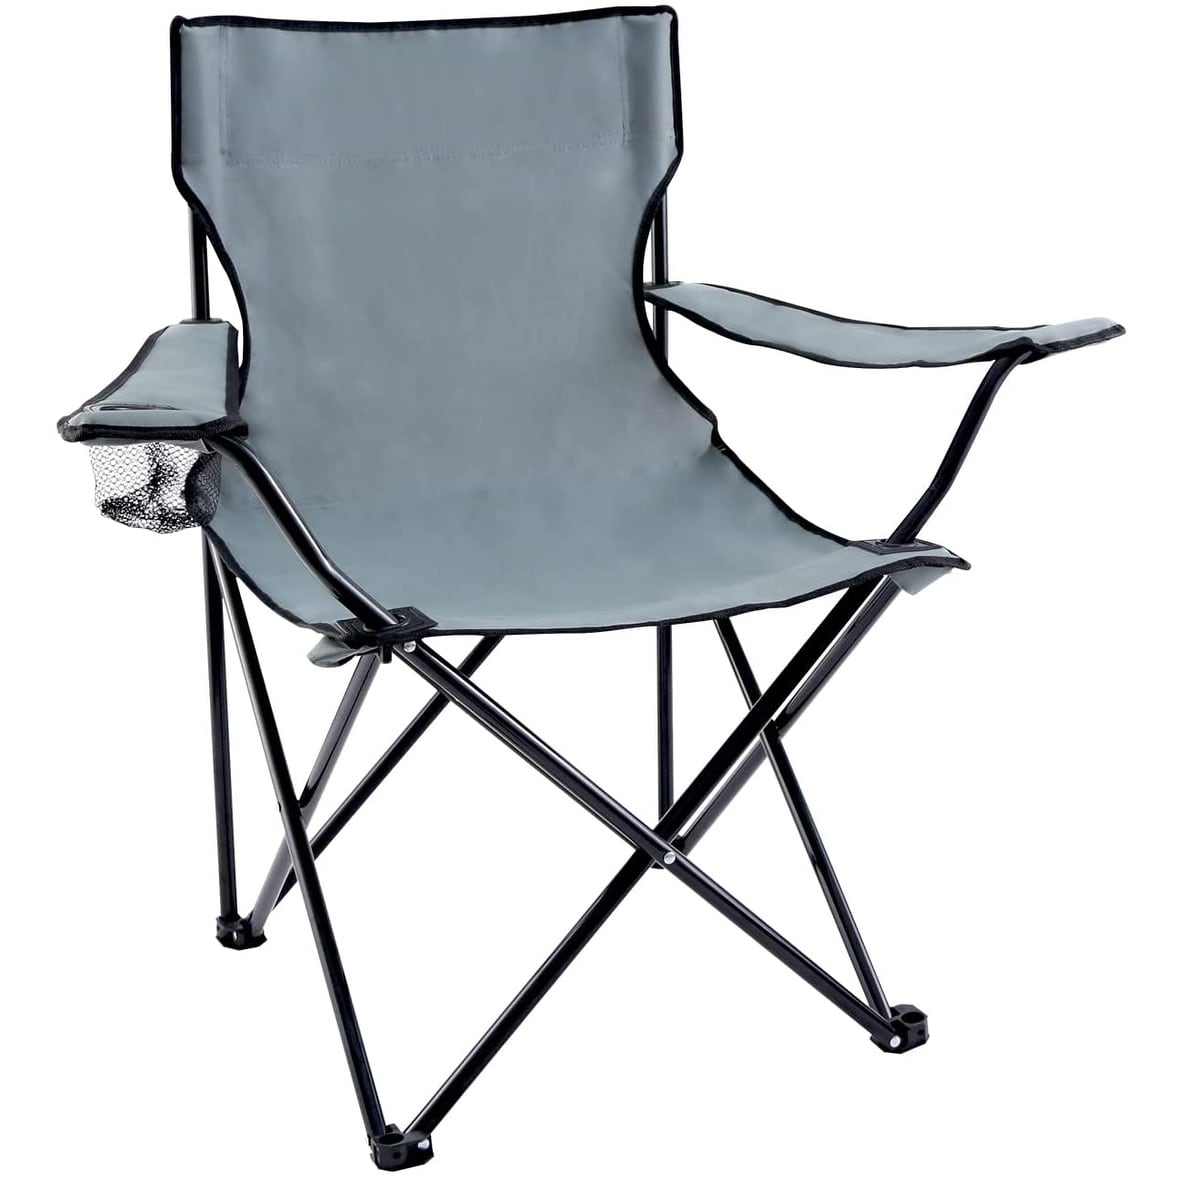 Large Portable Folding Camping Chair With Storage Bag